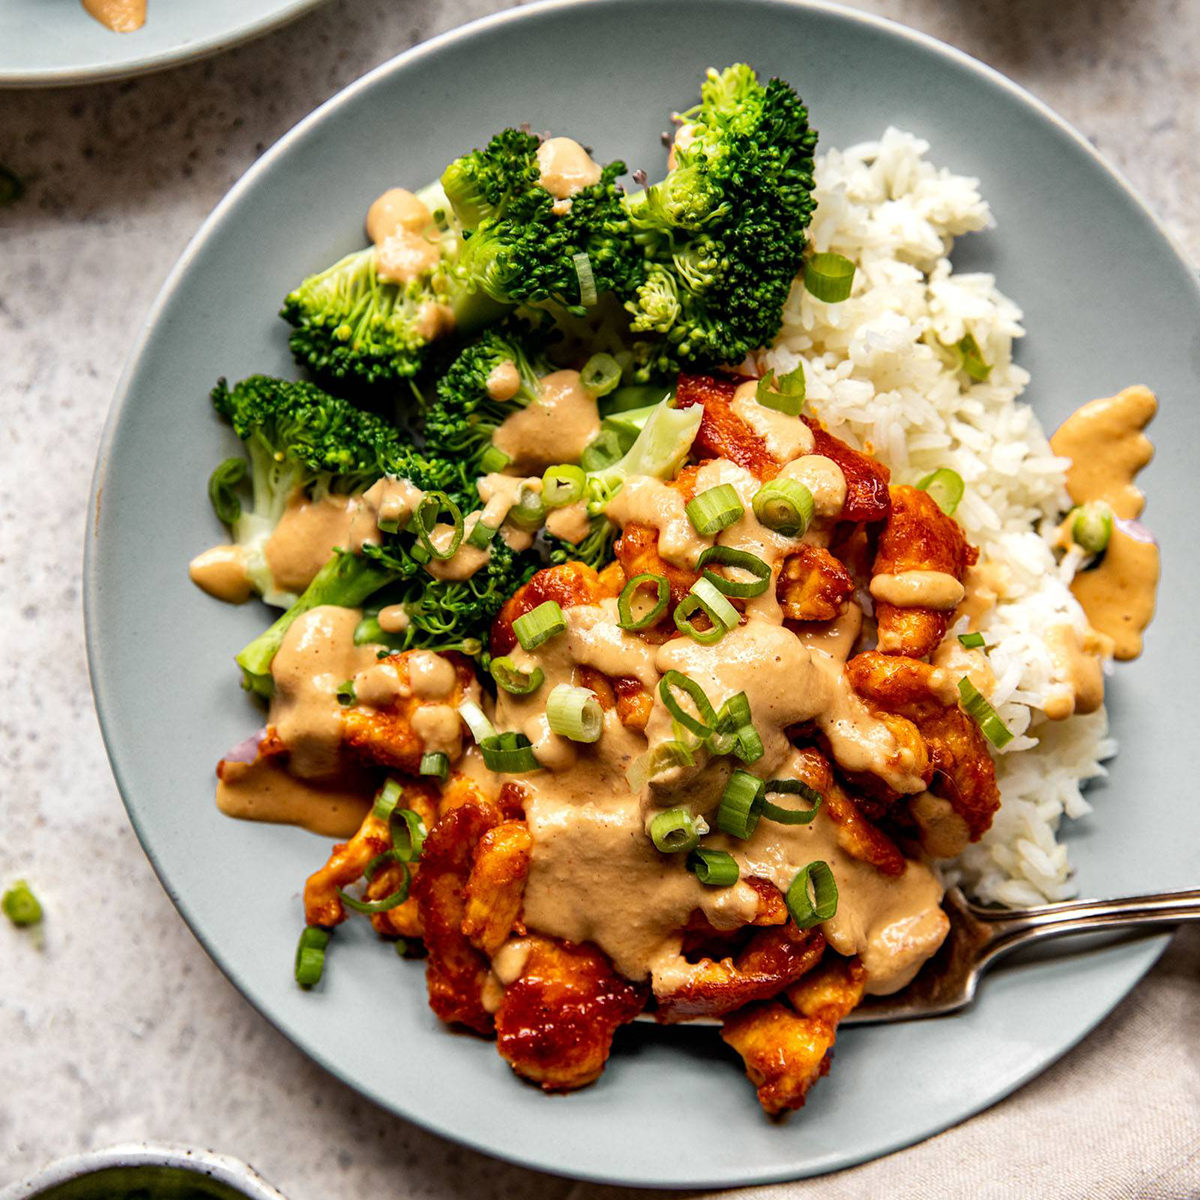 Chicken stir fry on a plate with rice and broccoli.